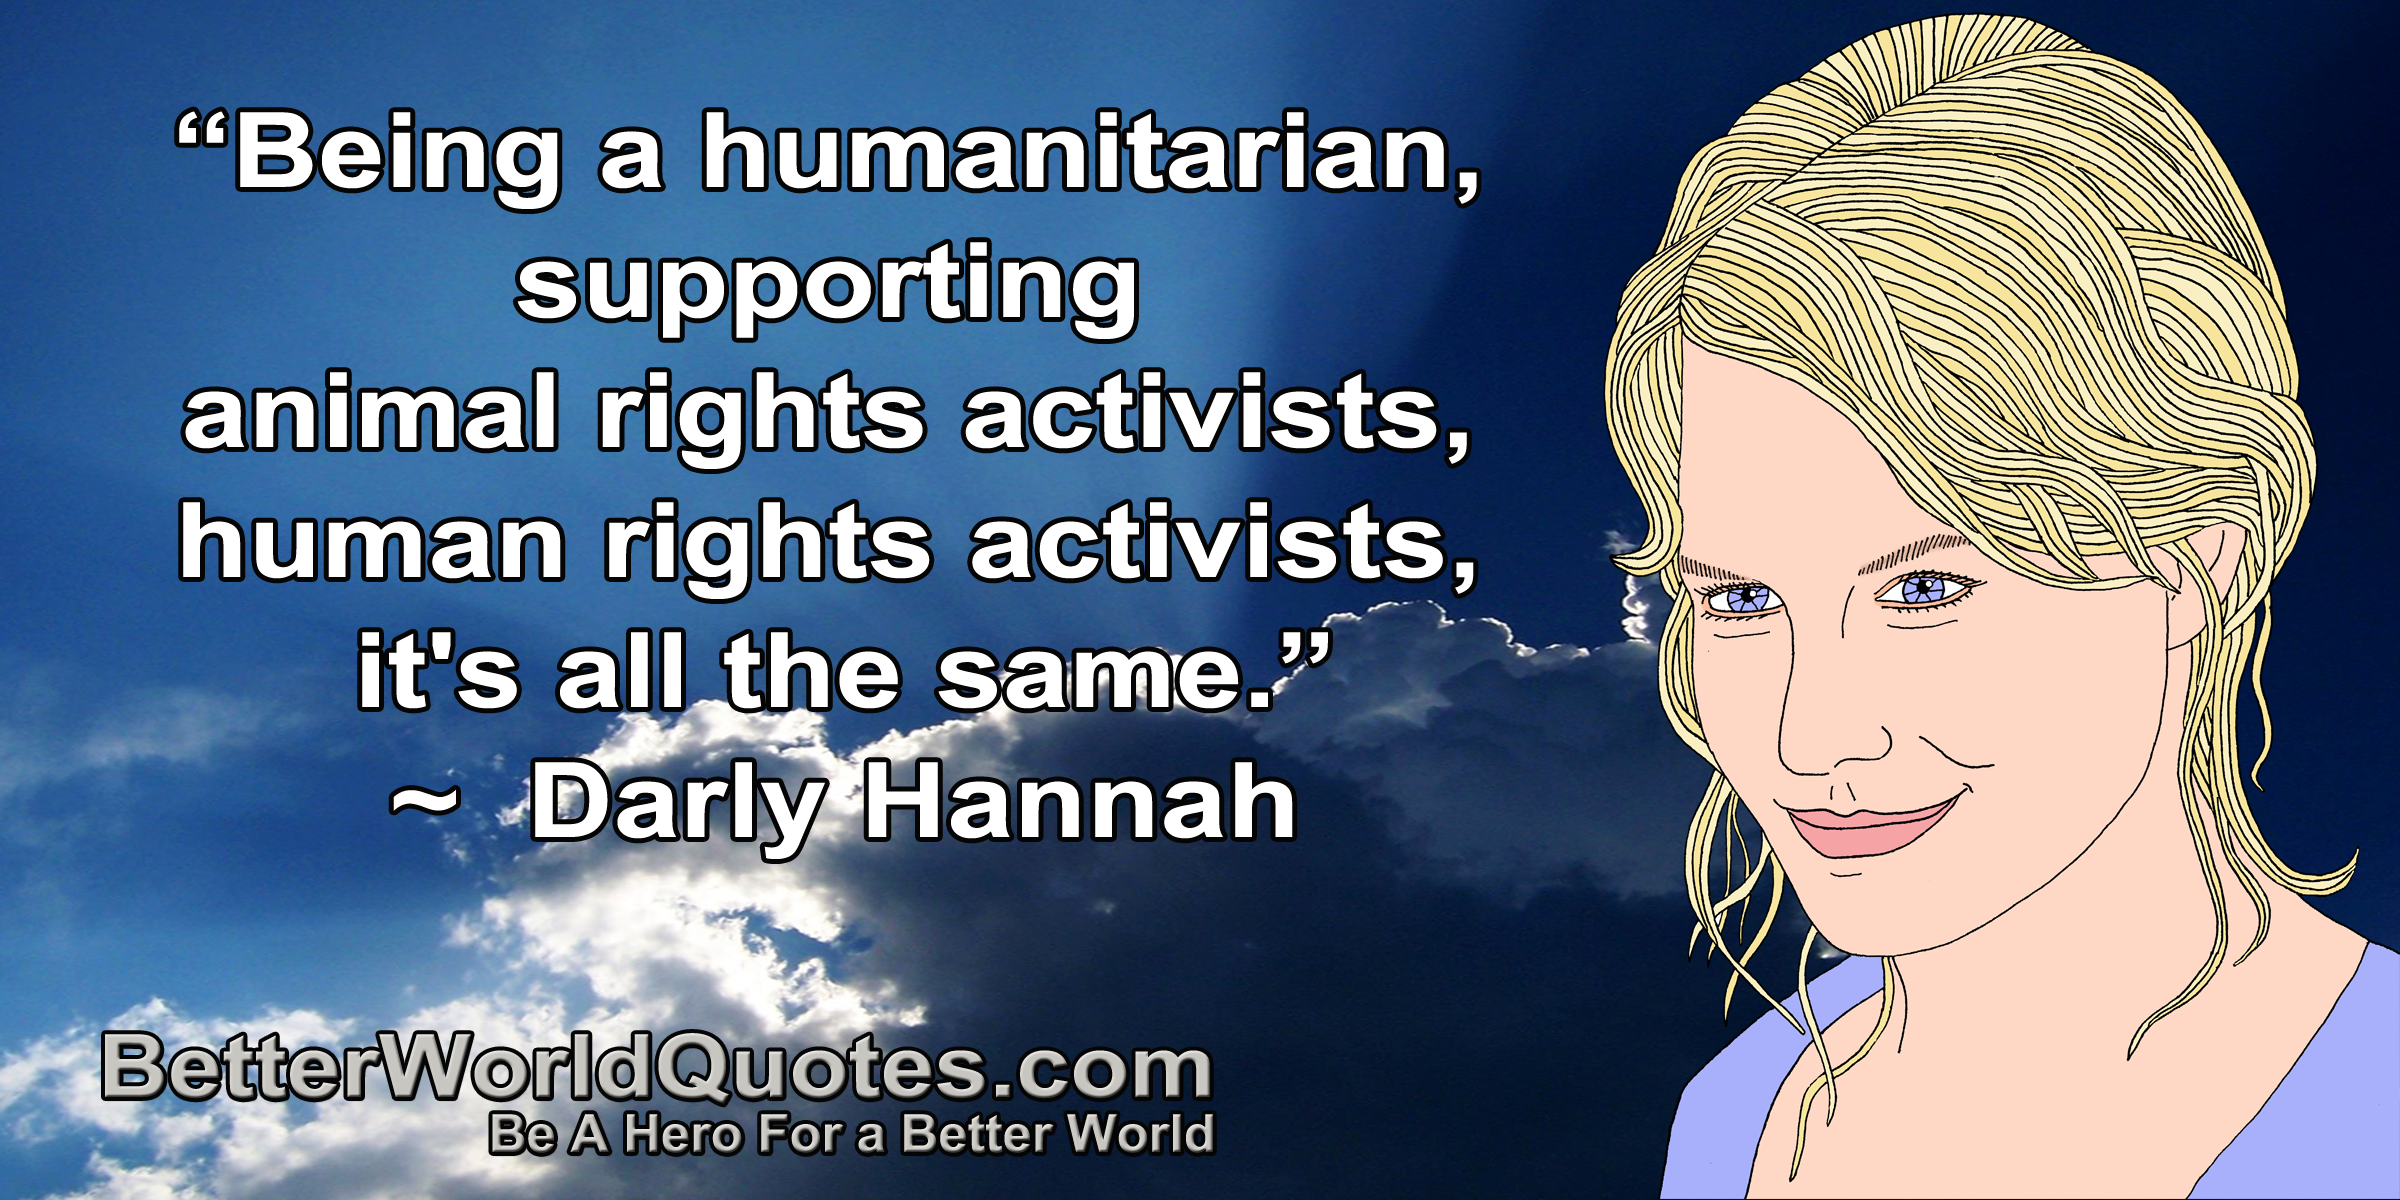 Being a humanitarian, supporting animal rights activists, human rights activists, it's all the same. Daryl Hannah